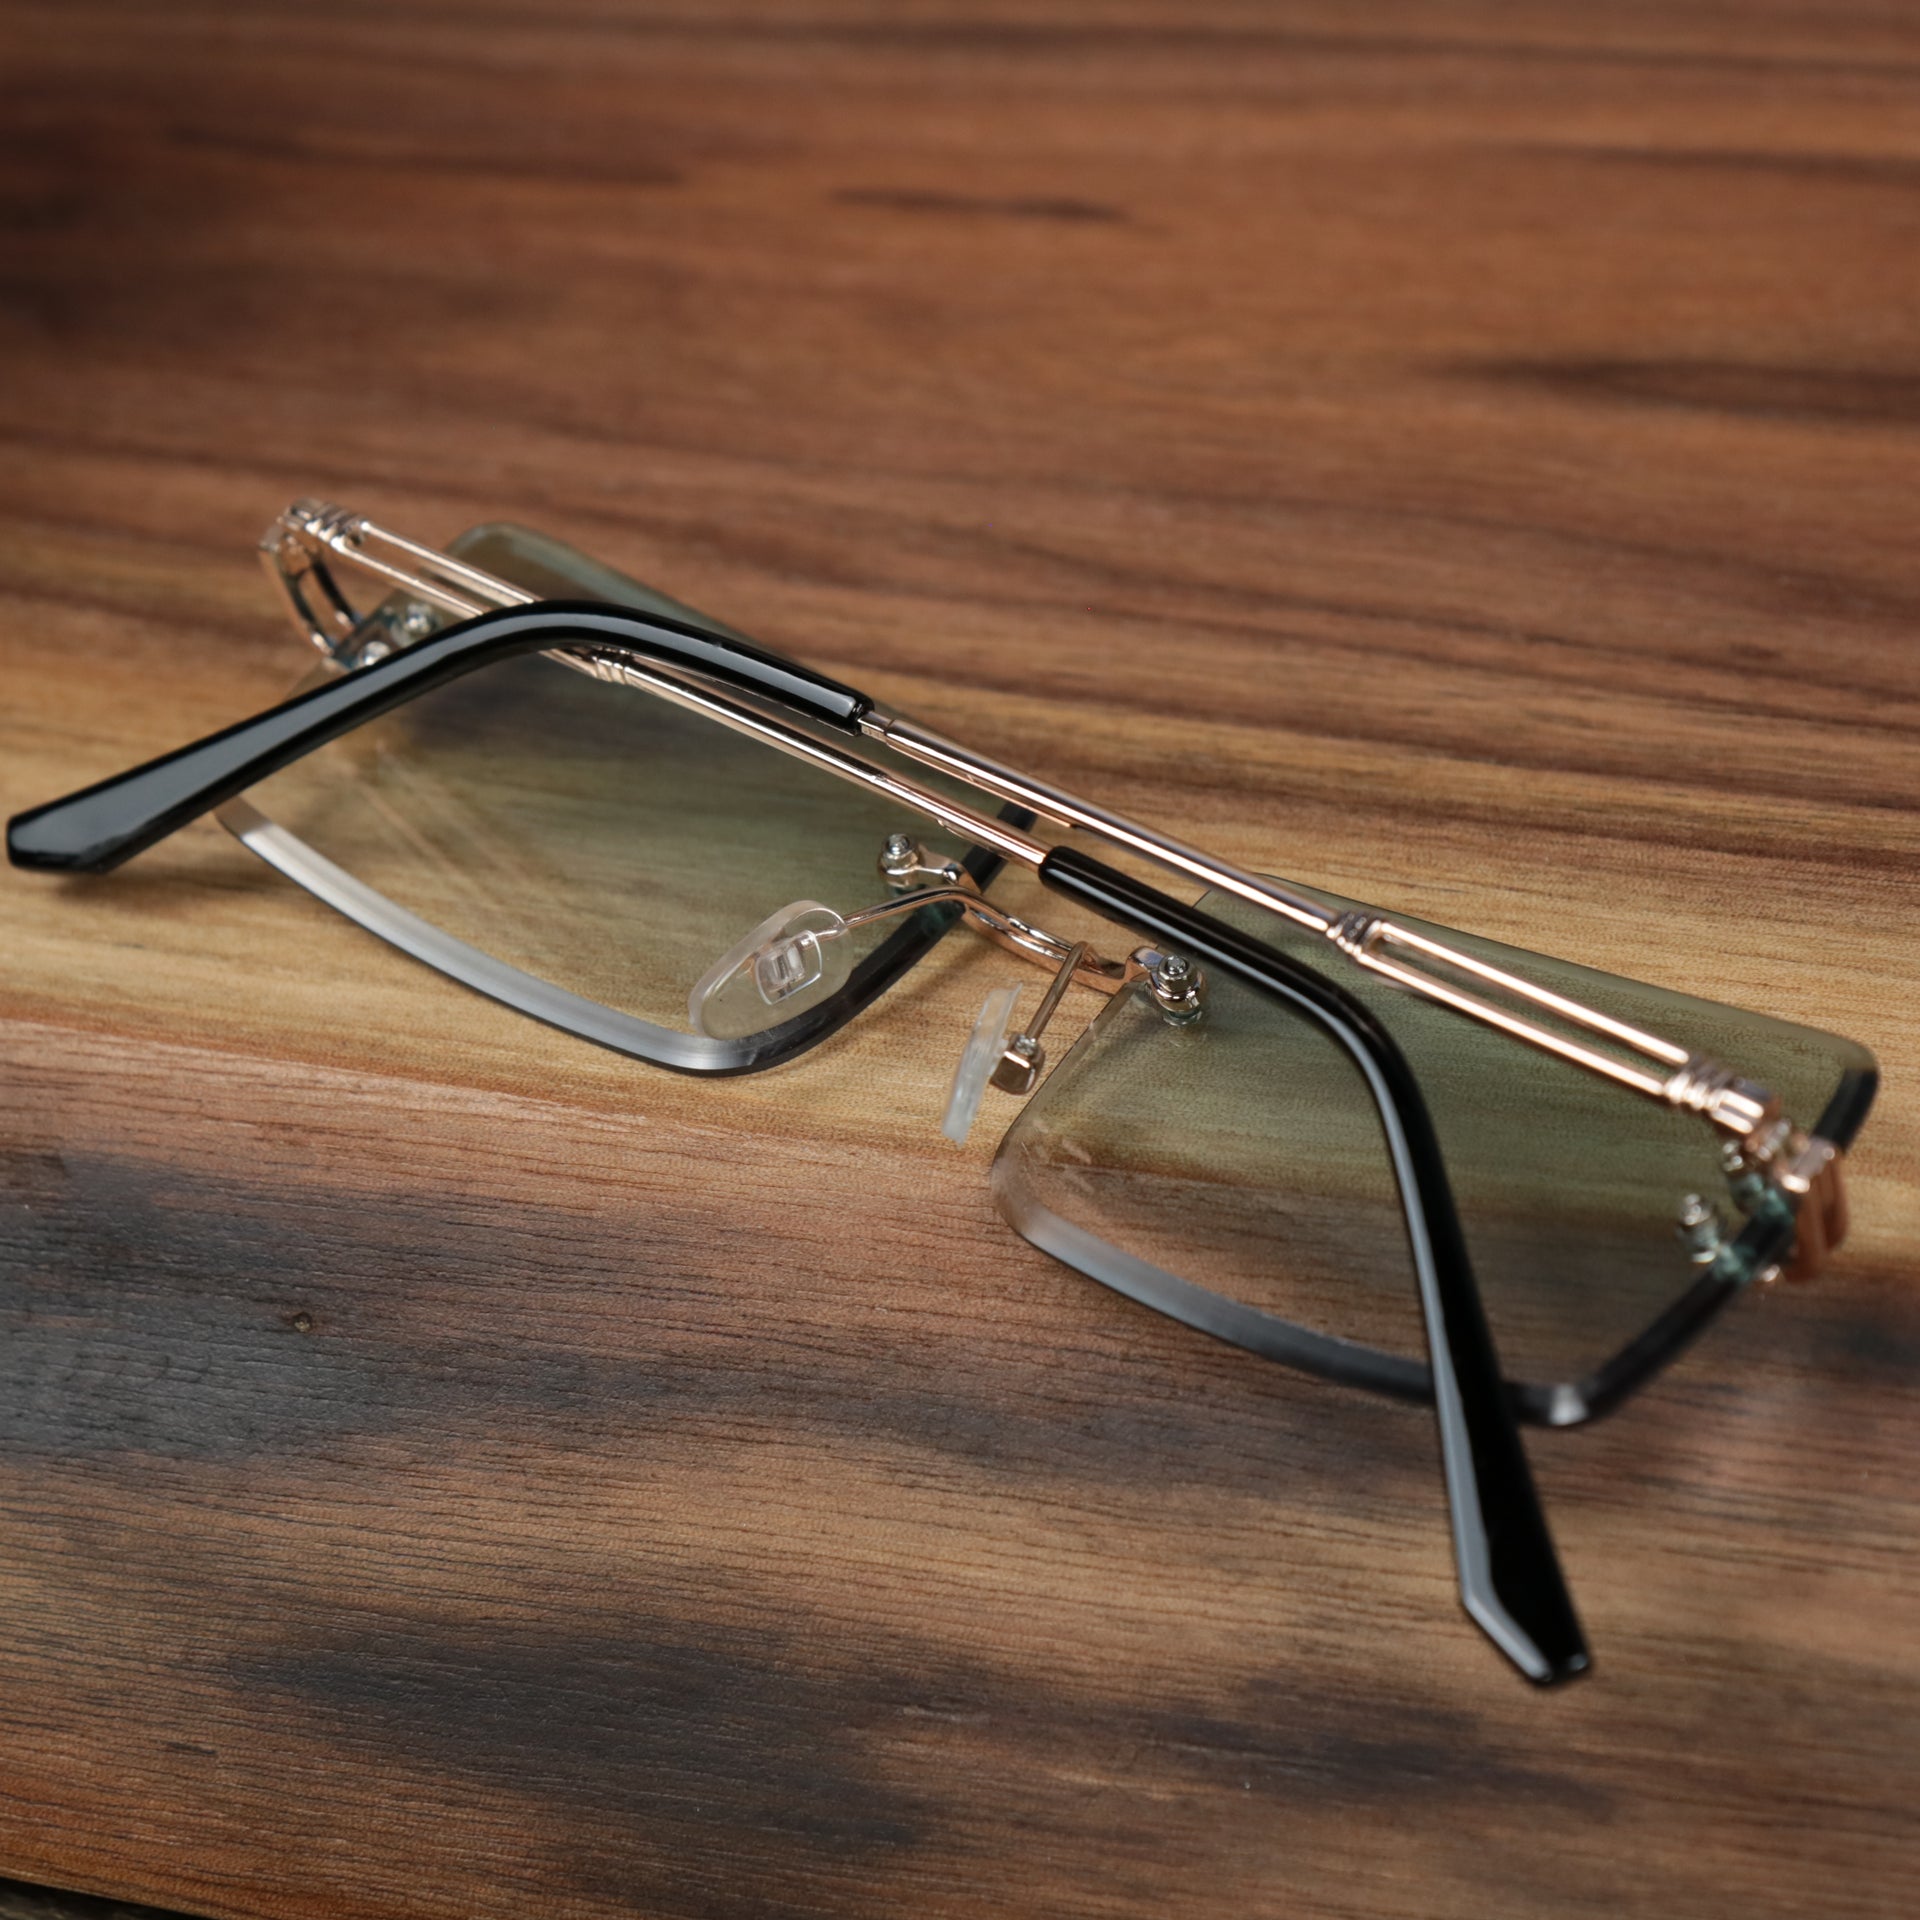 The Rectangle Frame Green Lens Sunglasses with Gold Frame folded up